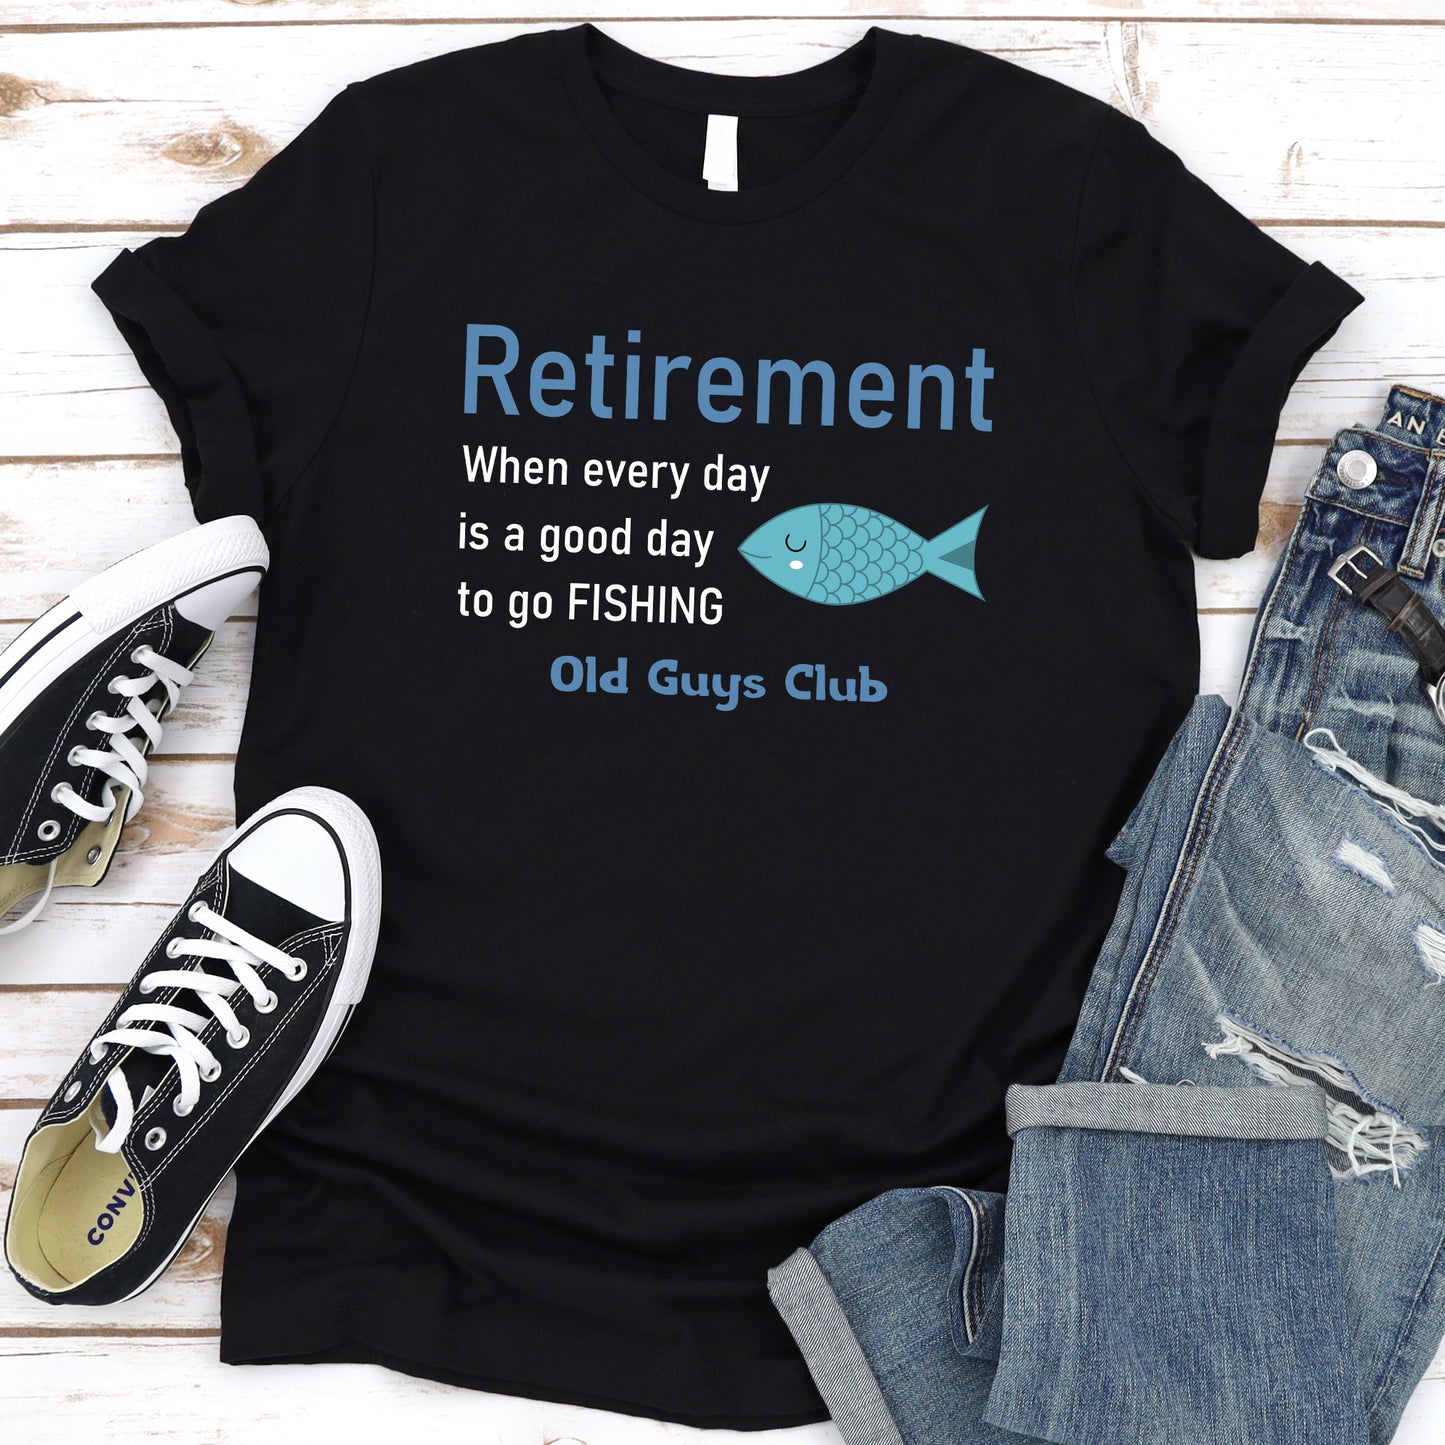 A Good Day to Go Fishing - T-shirt – Old Guys Club